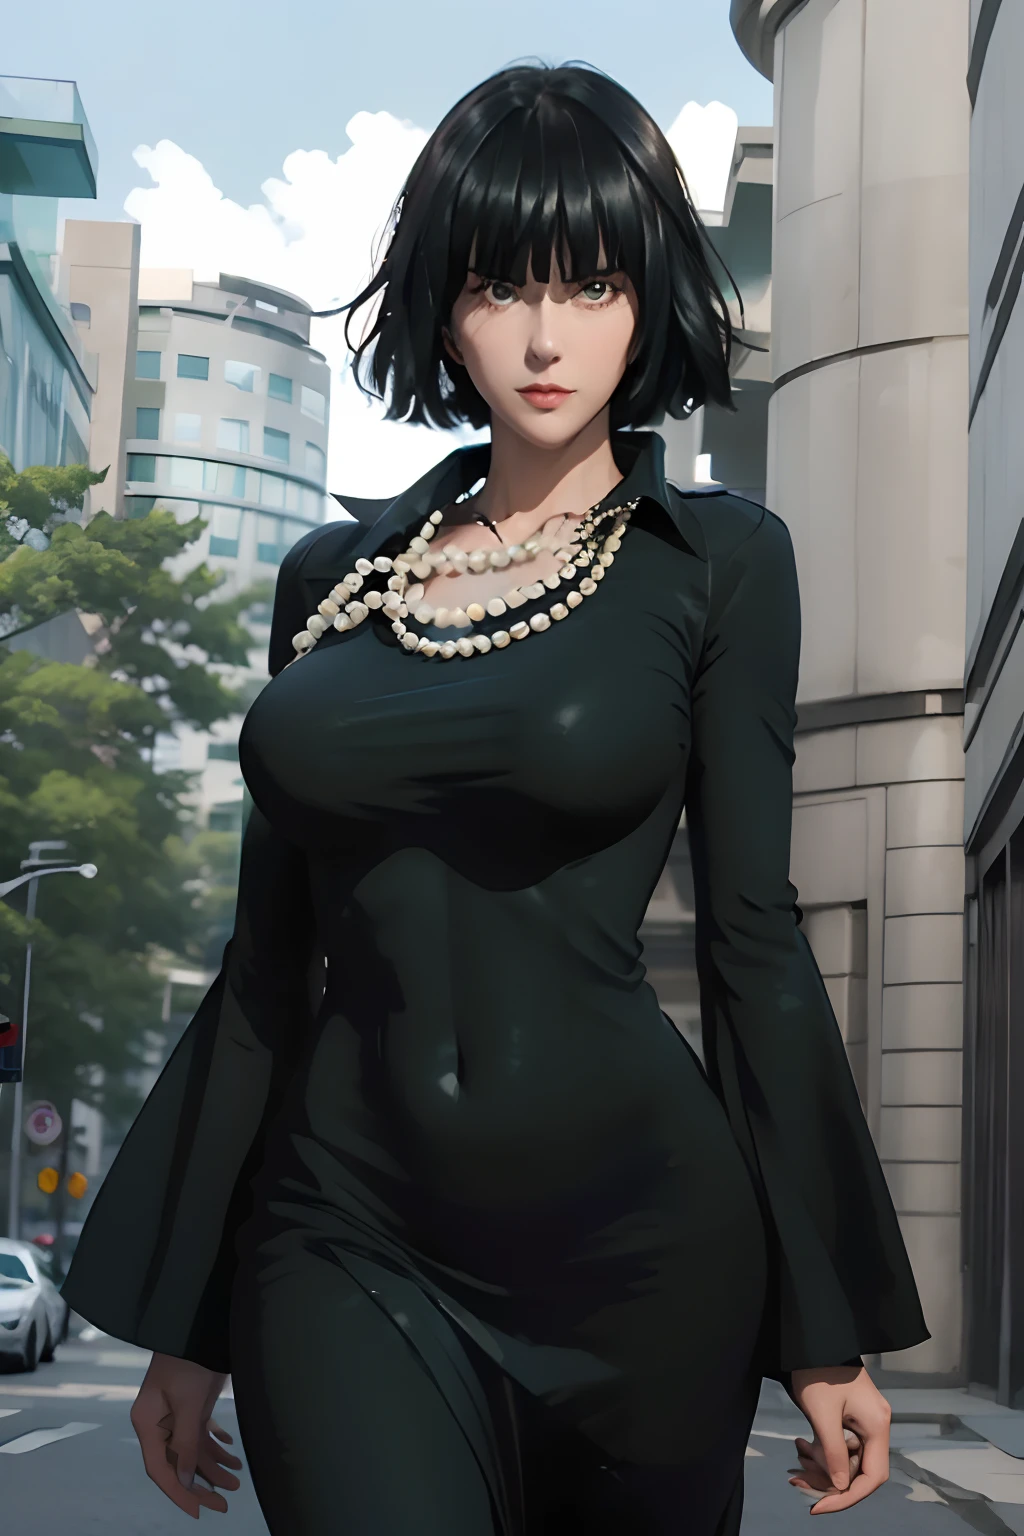 female with green fringe style bob haircut,  wearing v-neck black dress with high collar, wearing pearl necklaces, dominant pose, seductive smile, alone, solo, alone, (SOLO)(ALONE),FUBUKI,GLOWING SKIN,curved body, thick, huge breast